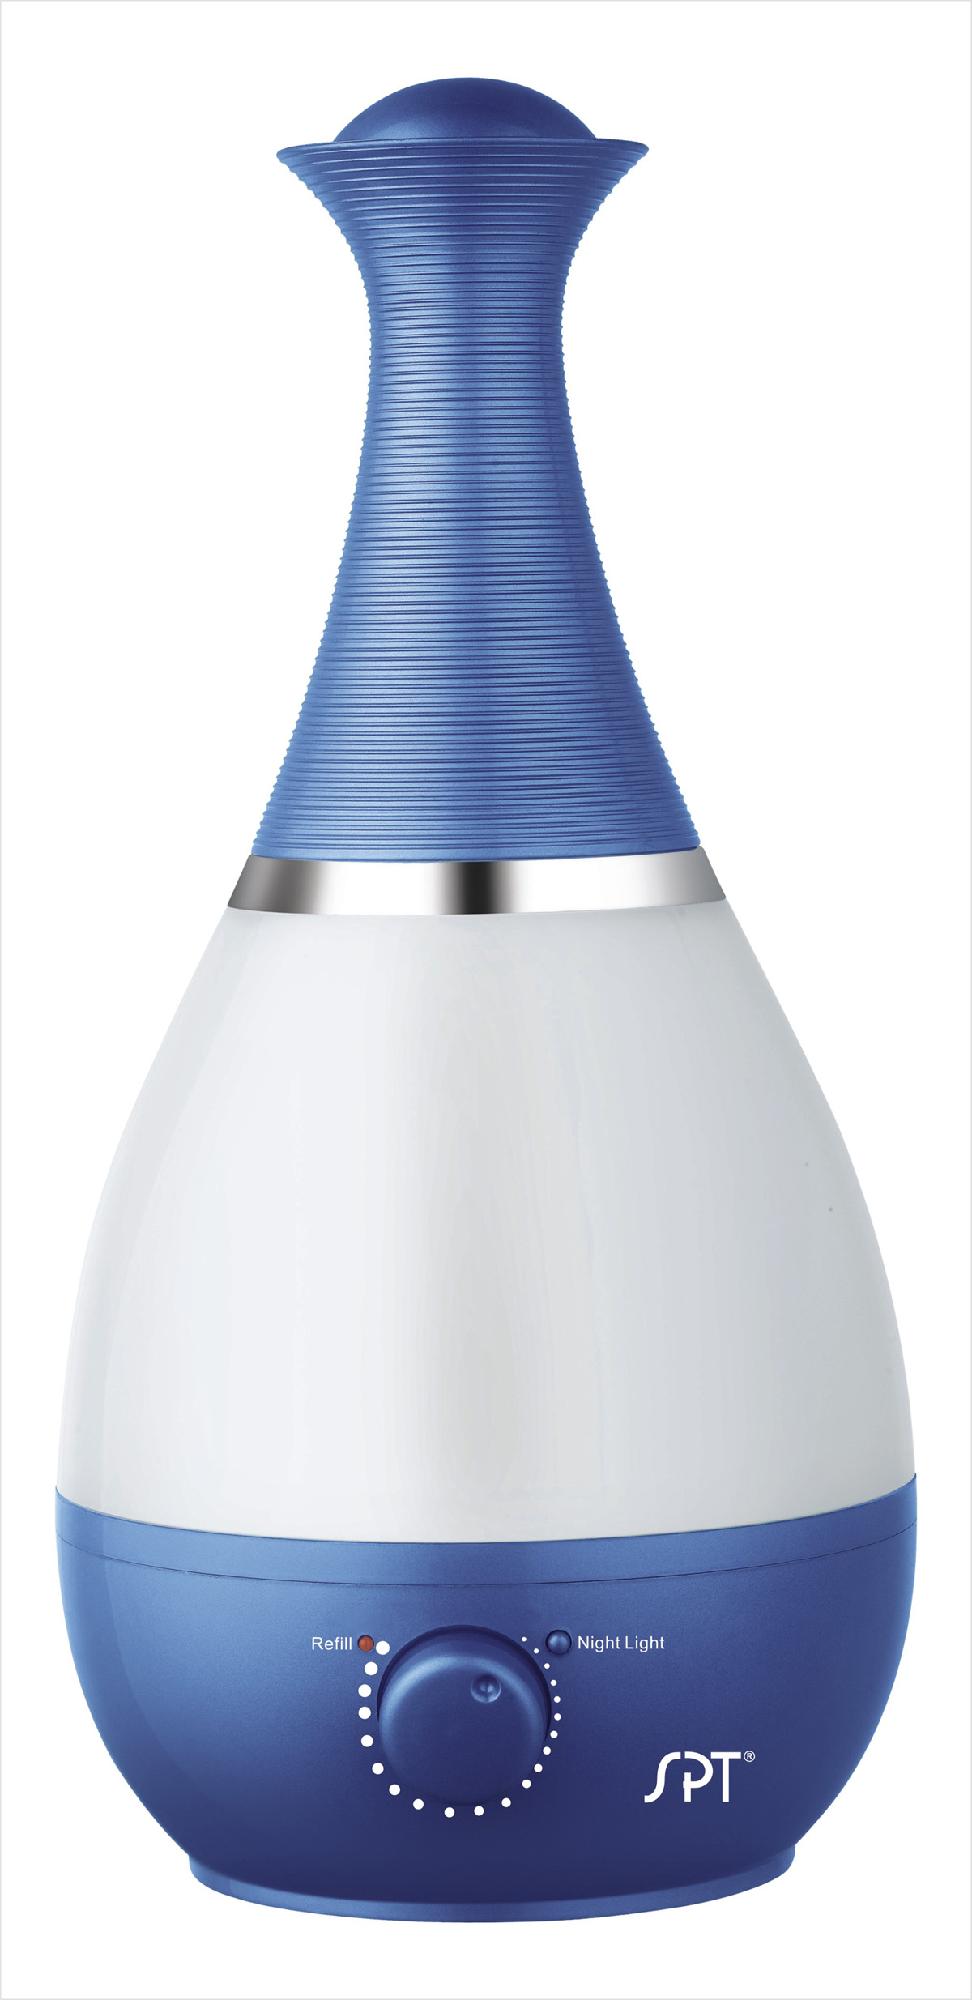 SPT SU-2550B  Ultrasonic Humidifier with Frangrance Diffuser (Blue)